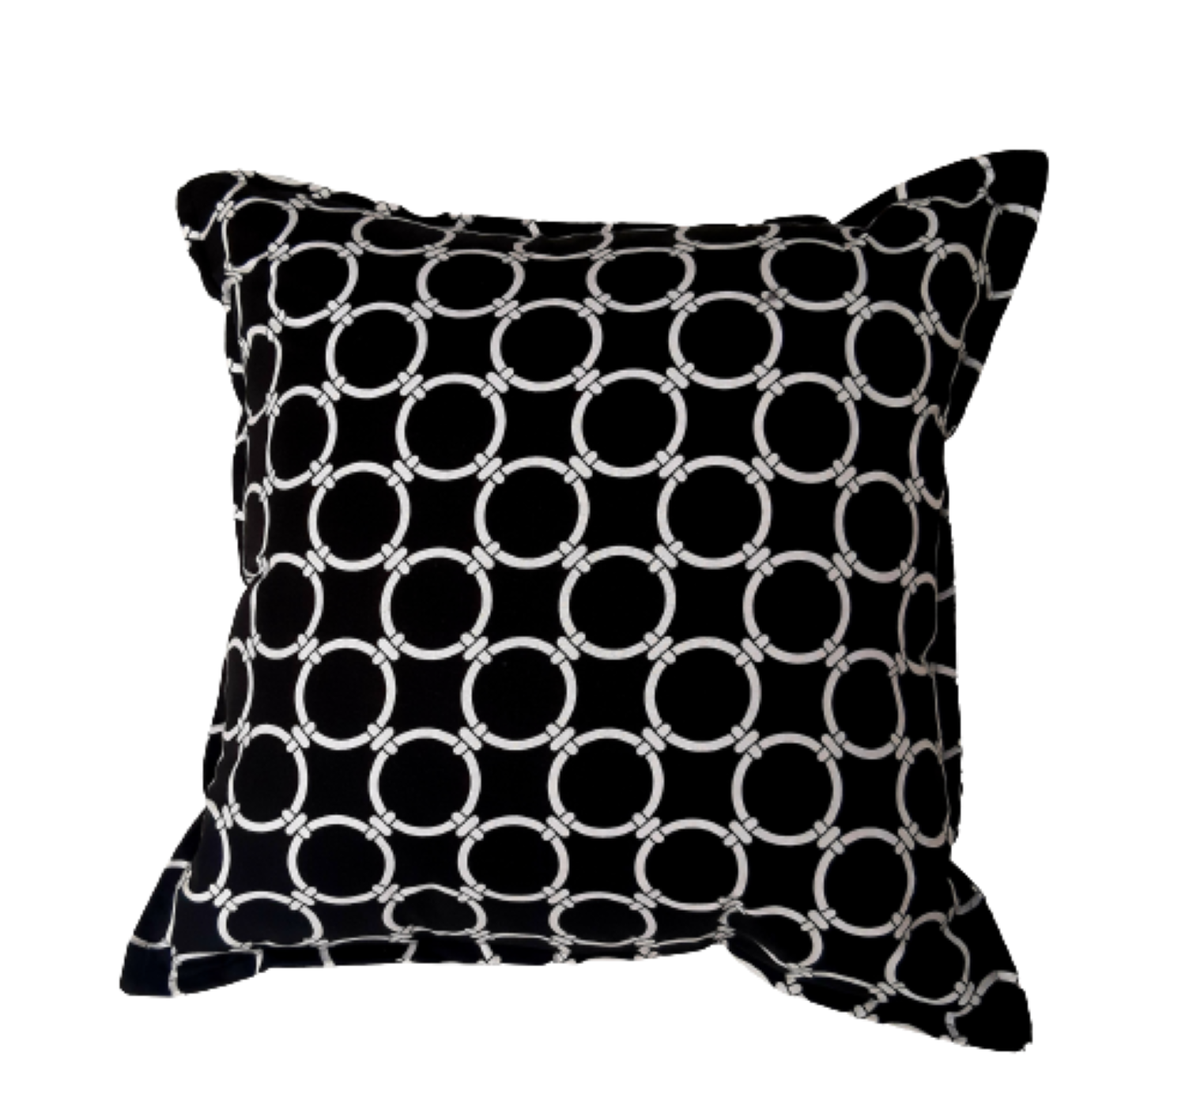 True Radiance – Black and White Scatter Cushion 60 x 60cm | Buy Online ...